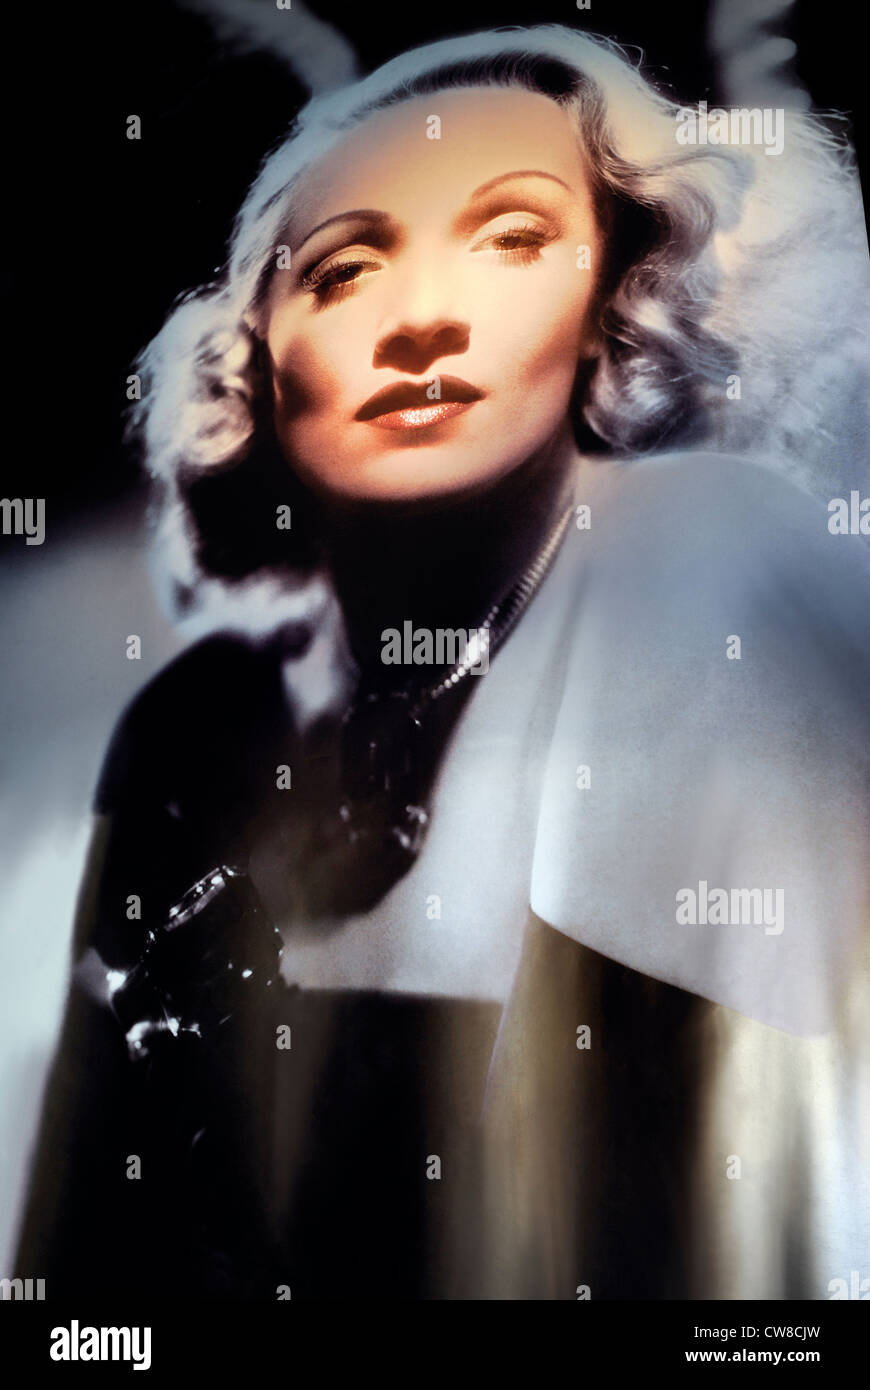 Spain, Segovia: Image of  Marlene Dietrich of the film 'The Blue Angel' in an exposition in the museum Torreon de Lozoya Stock Photo